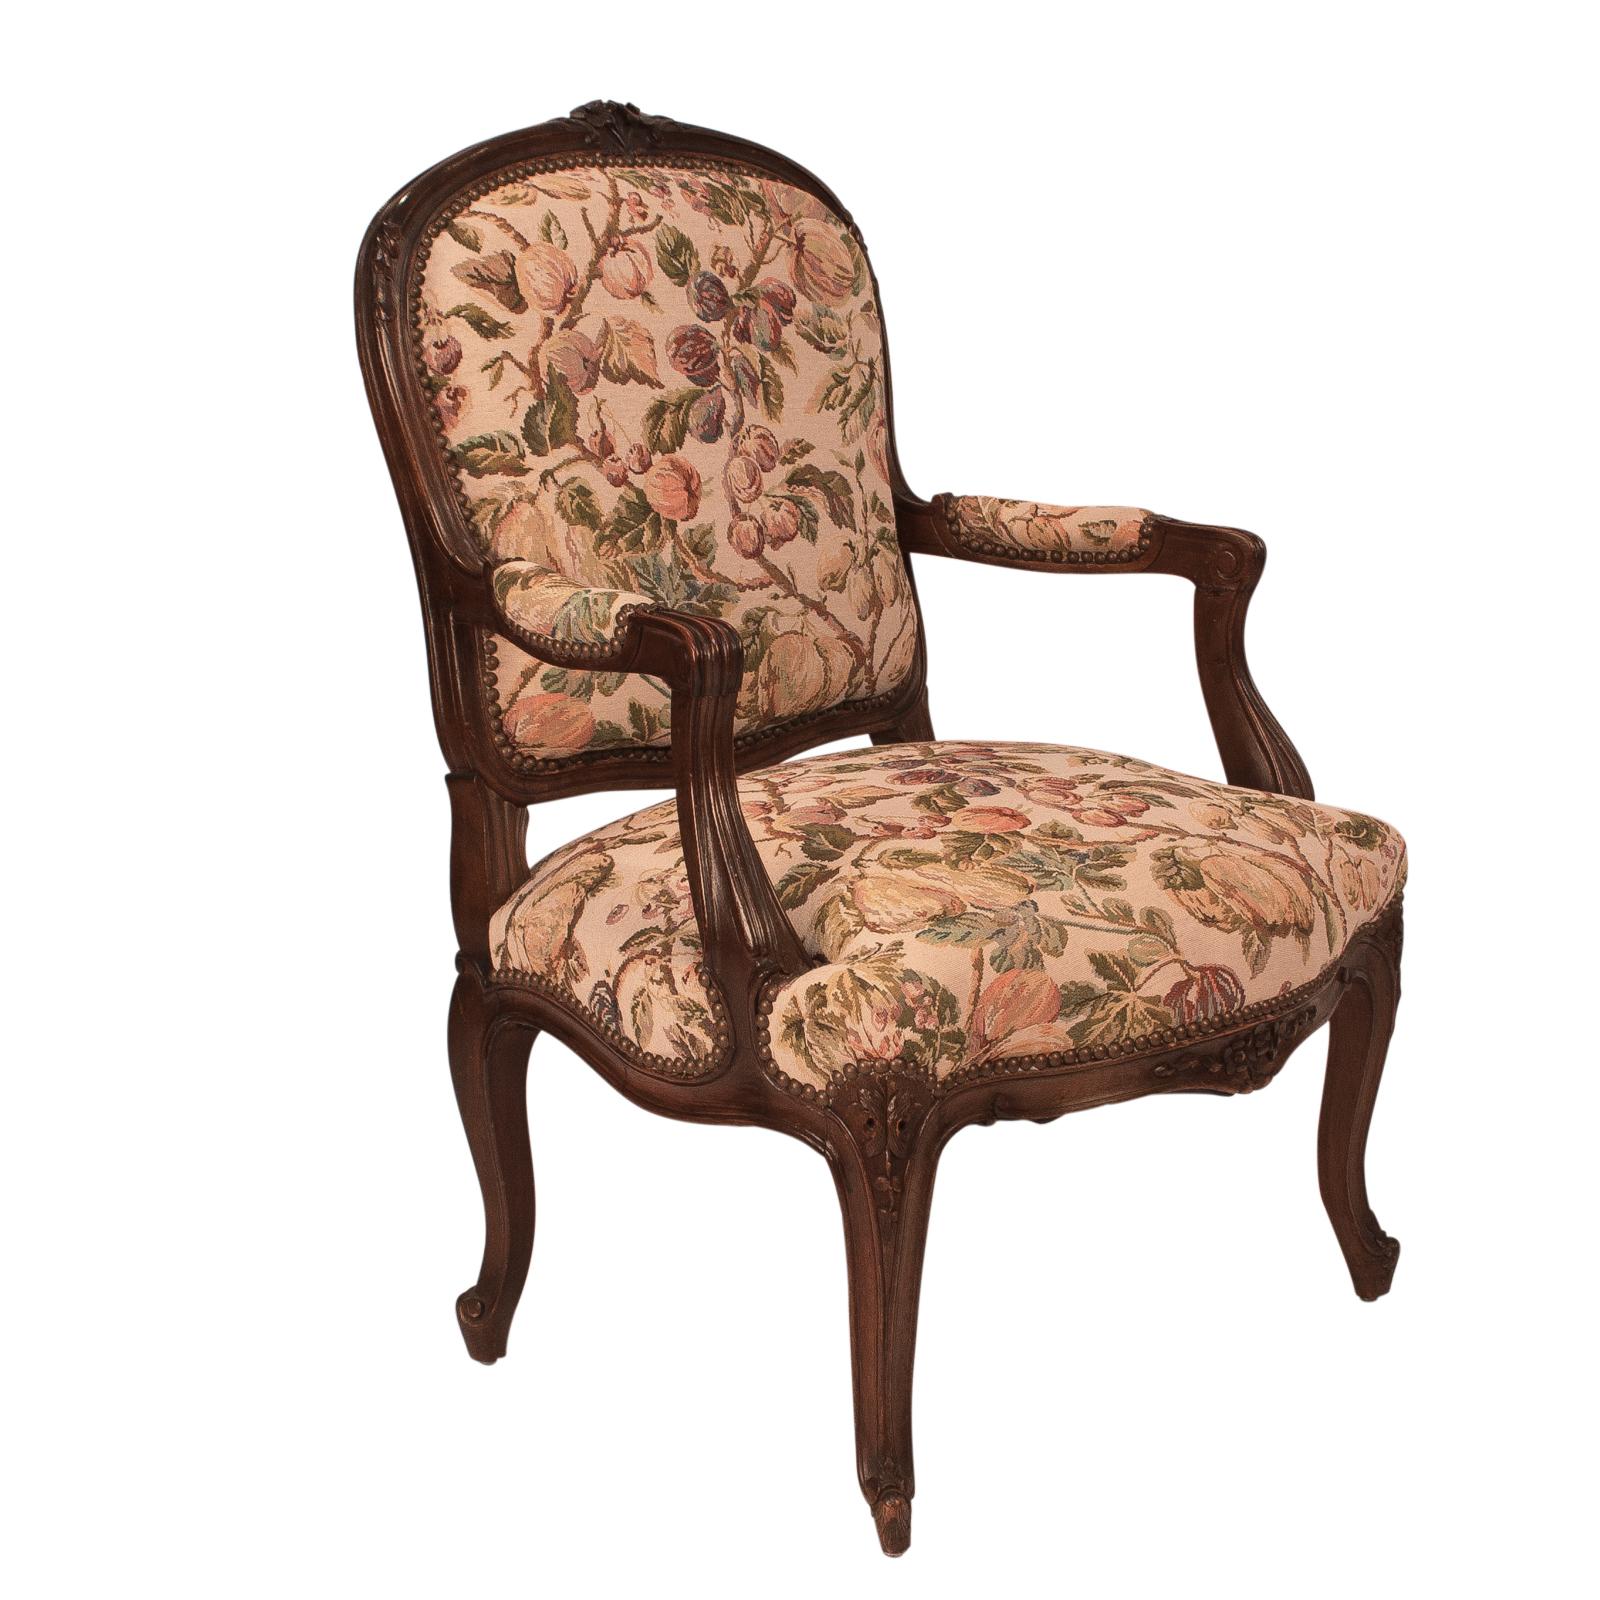 A pair of early 20th century French armchairs in the Louis XVI style, circa 1900 carved walnut with vintage tapestry upholstery. Good solid frames recently polished and tightened. In the style of Louis XV.